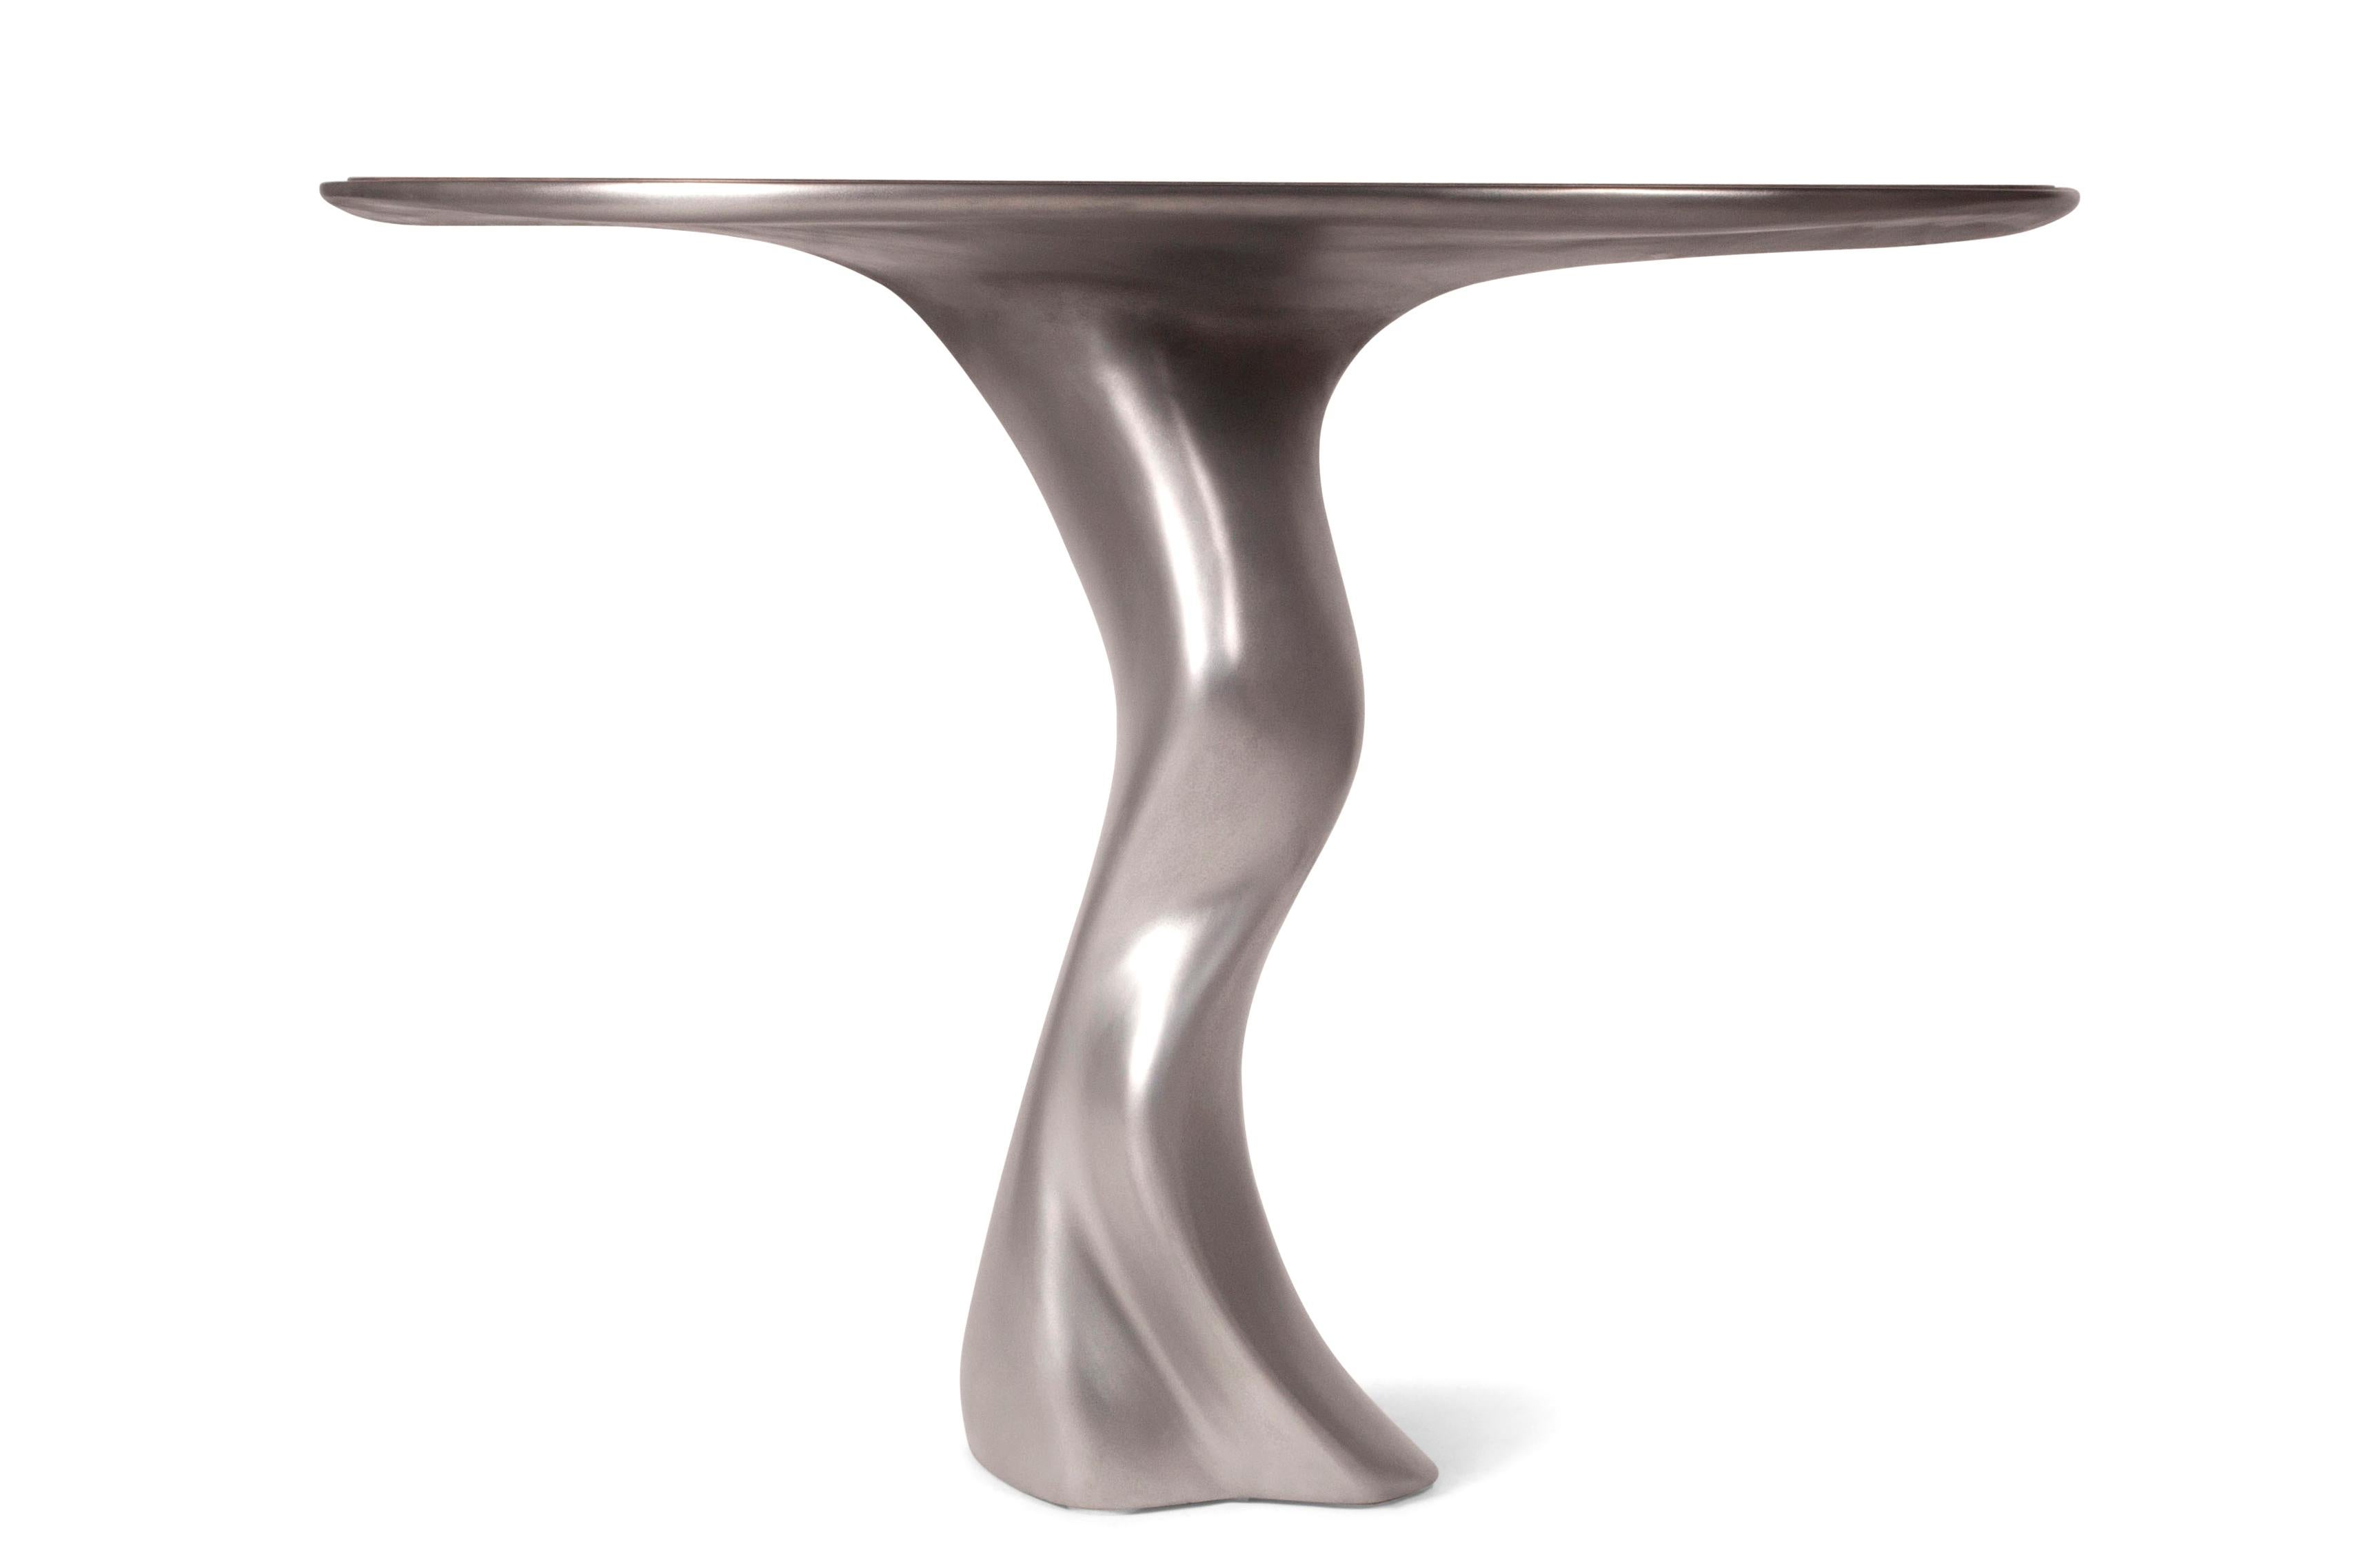 Carved Amorph Haya Console Table Stainless Steel Finish with Walnut Top Wall Mount